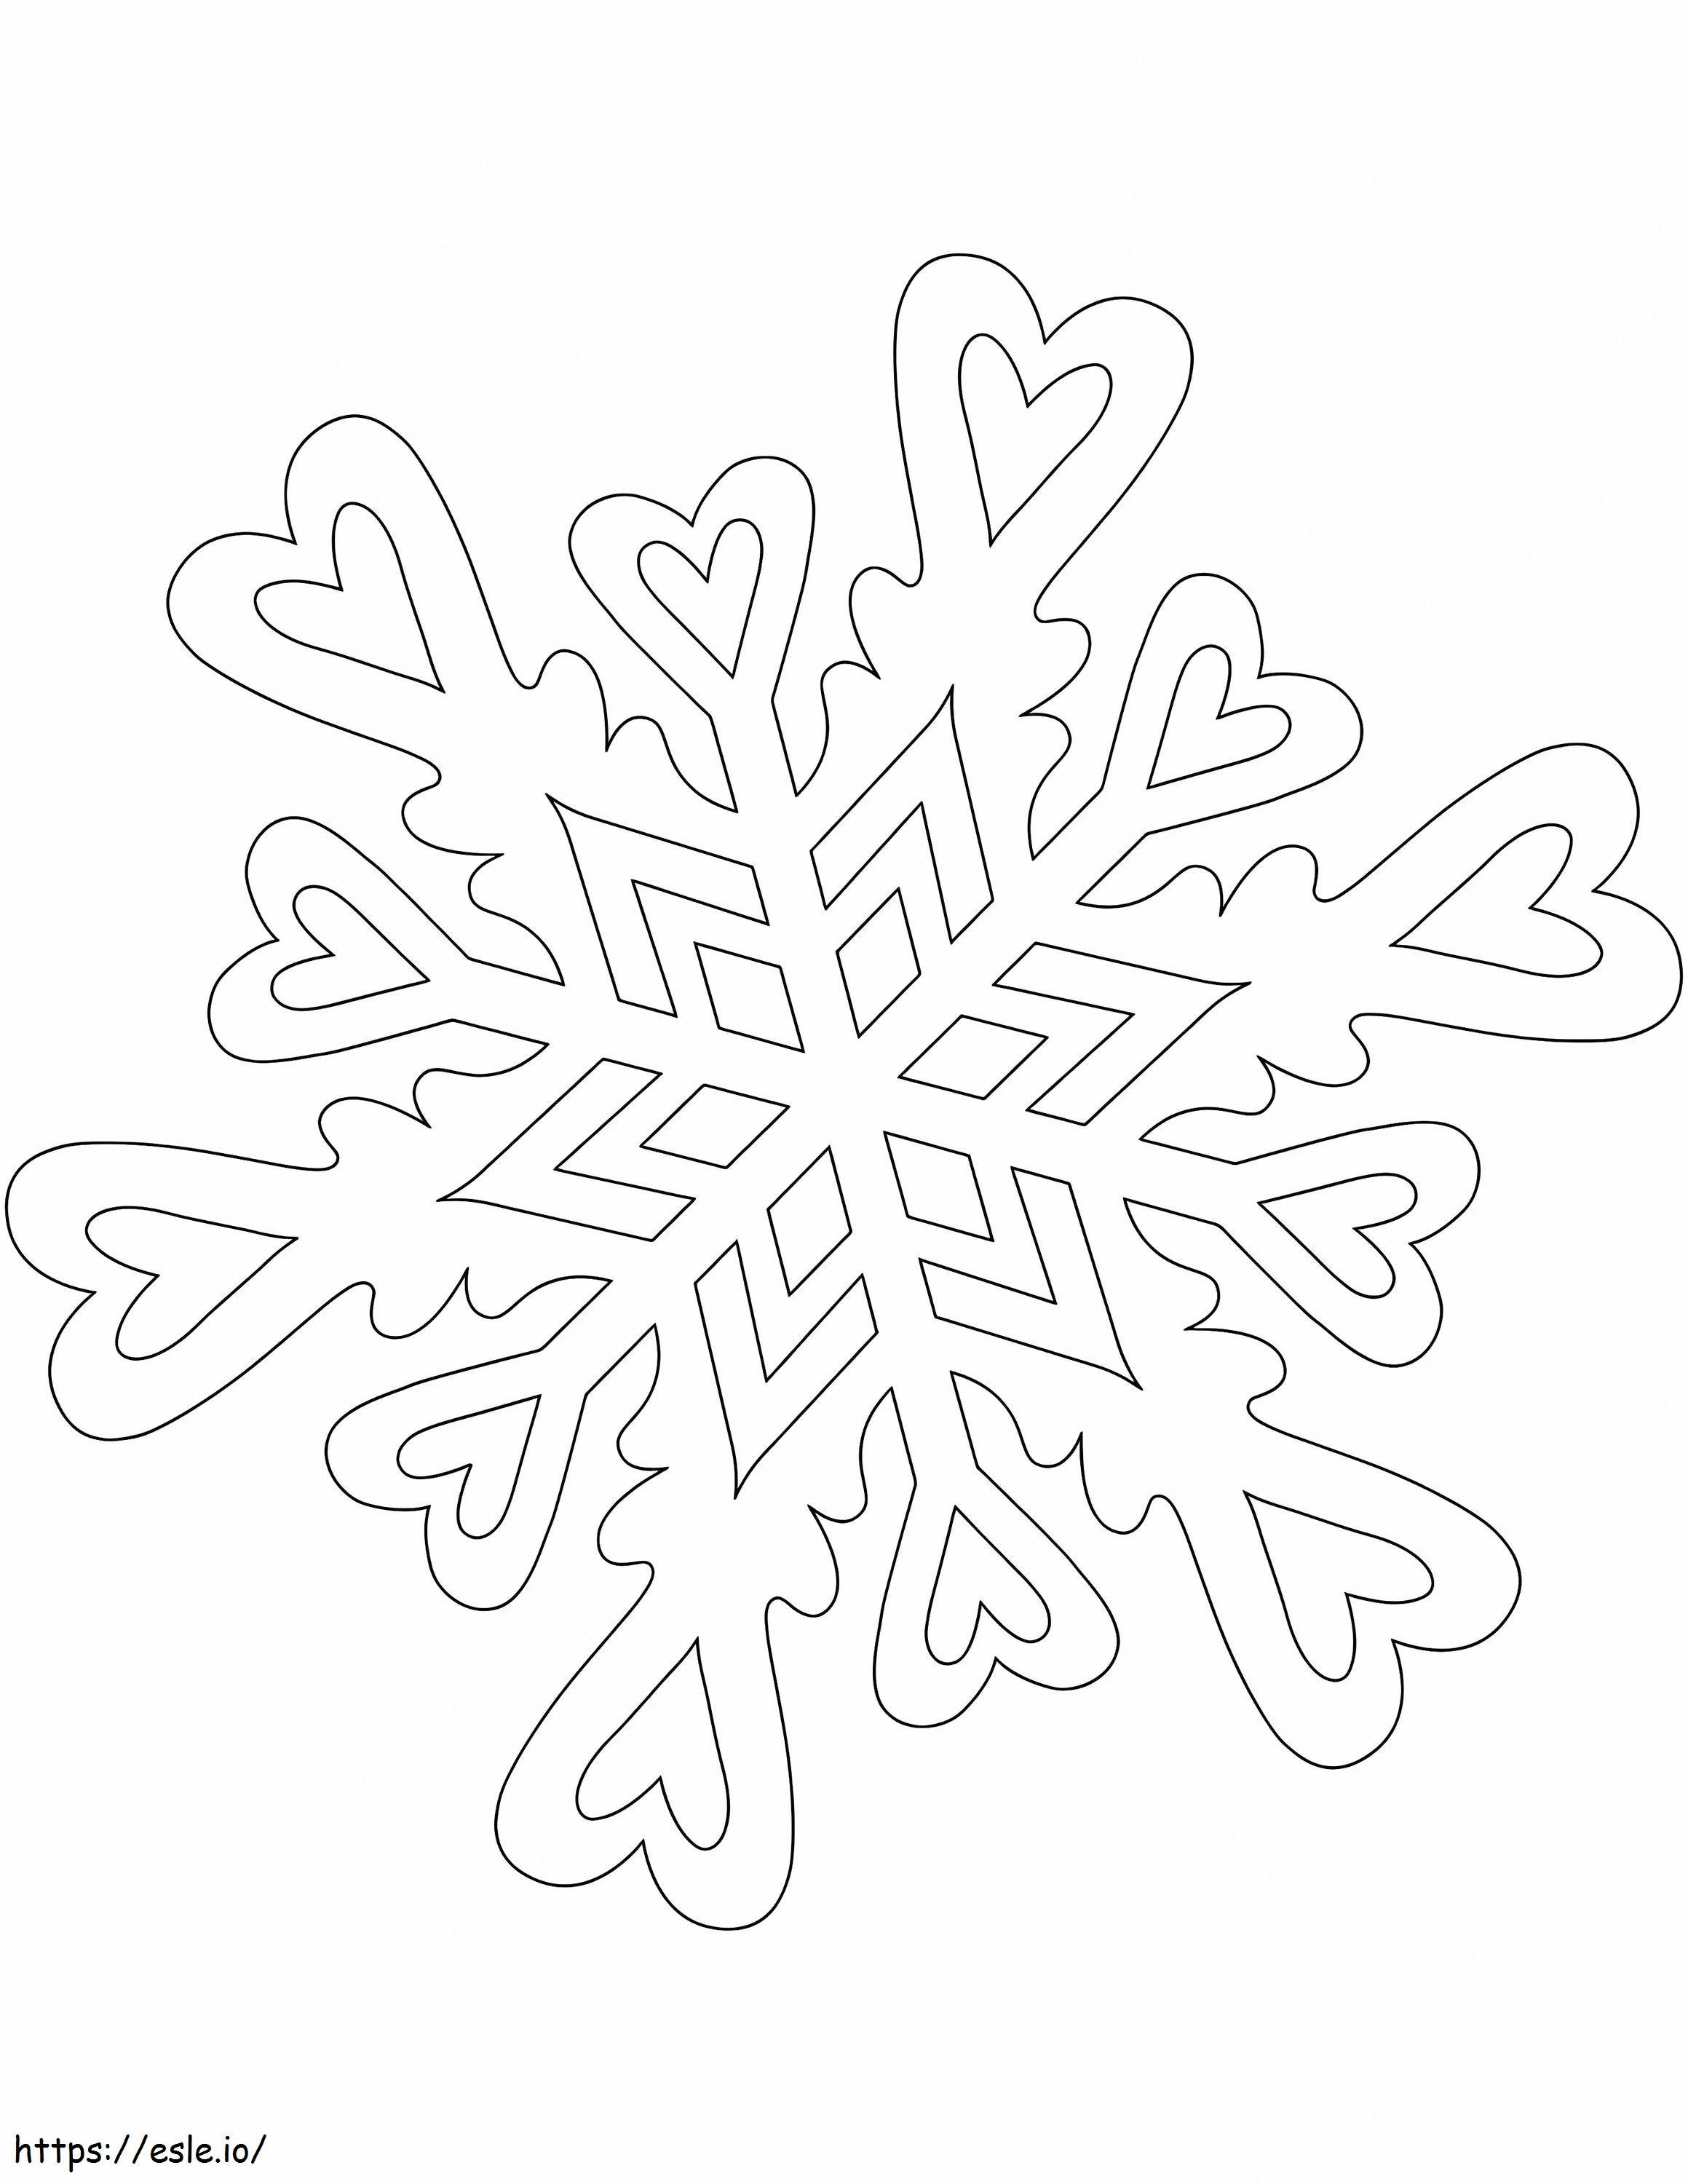 Snowflake Pattern With Hearts coloring page